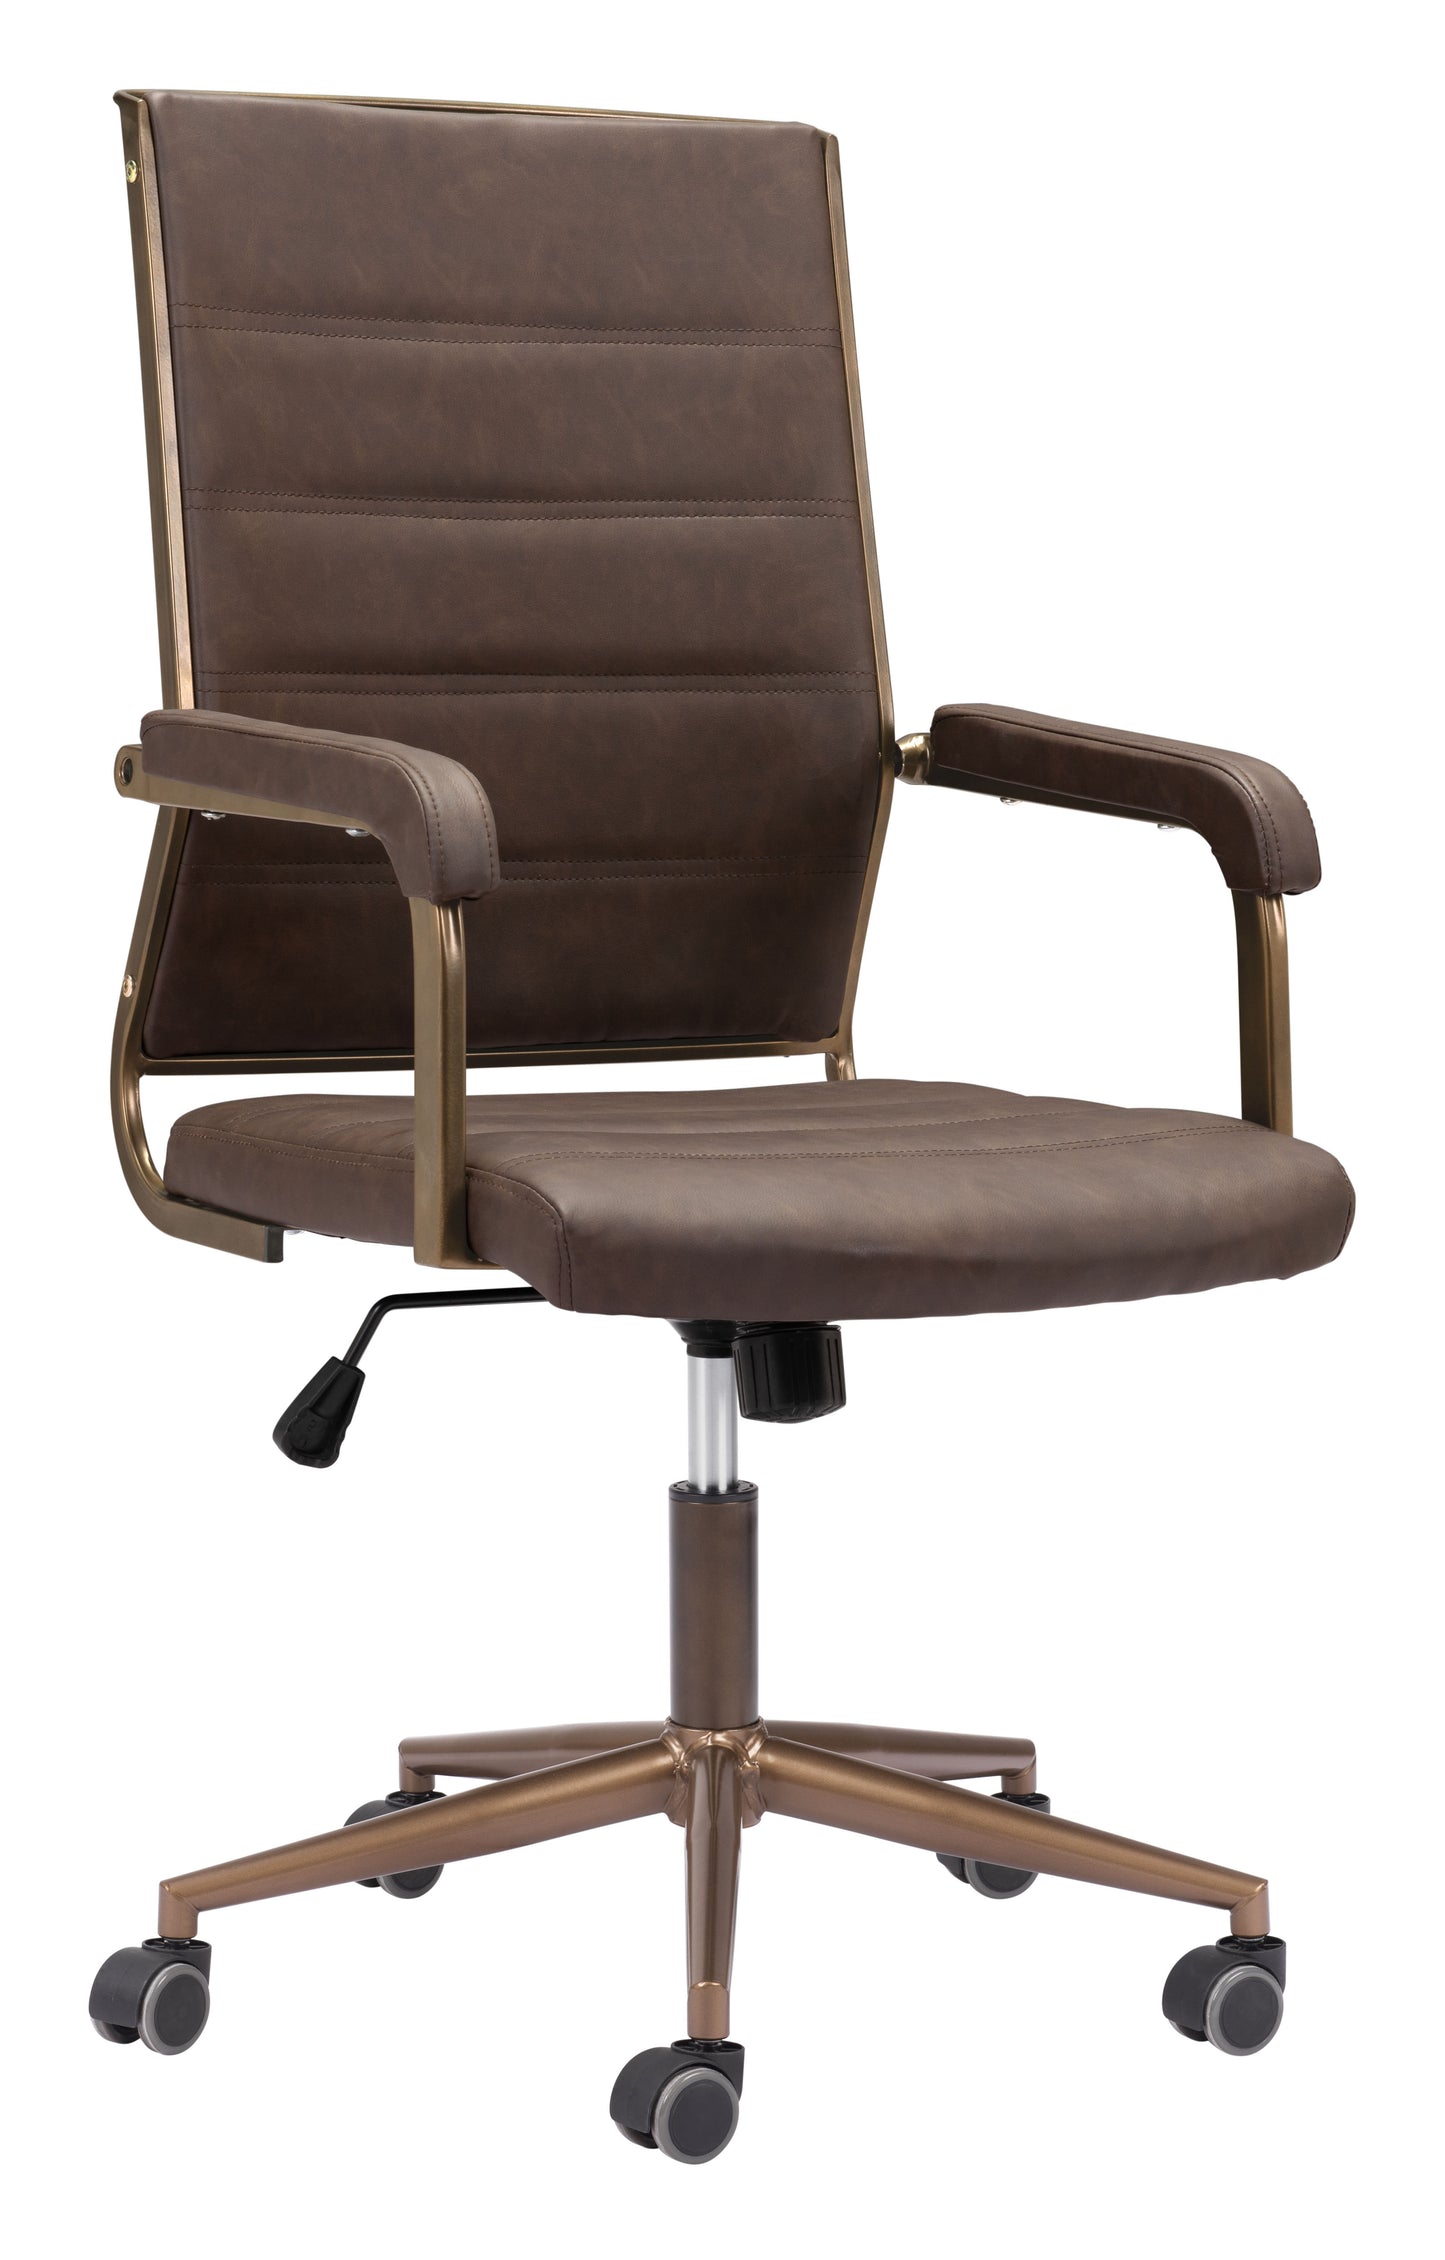 Auction Office Chair Espresso